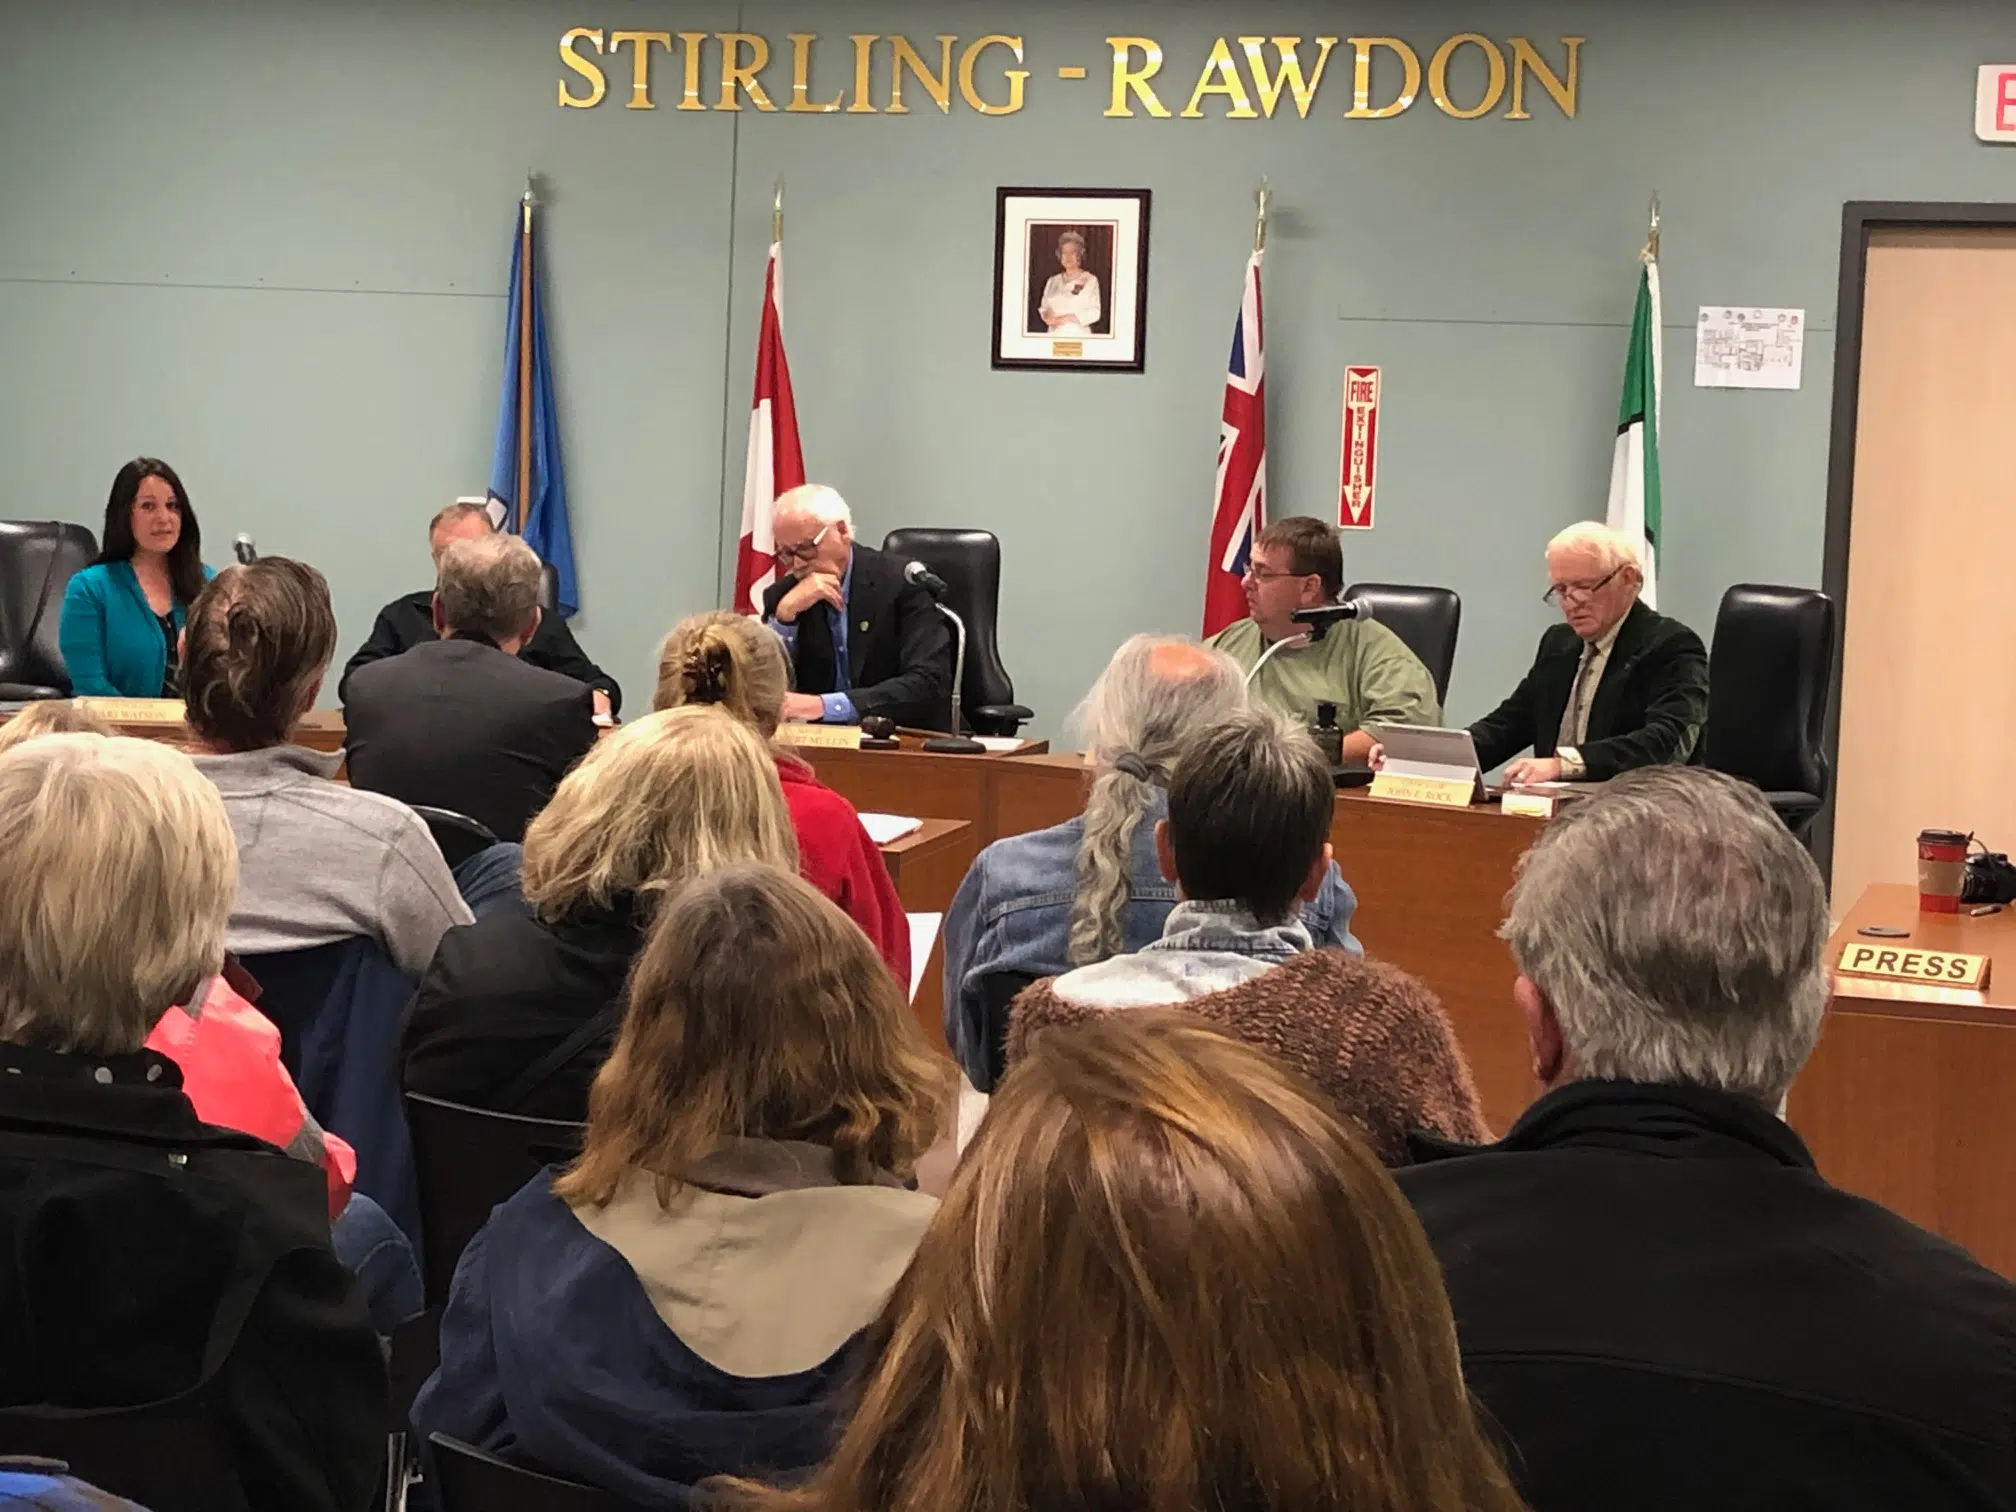 Report critical of Stirling-Rawdon councillor